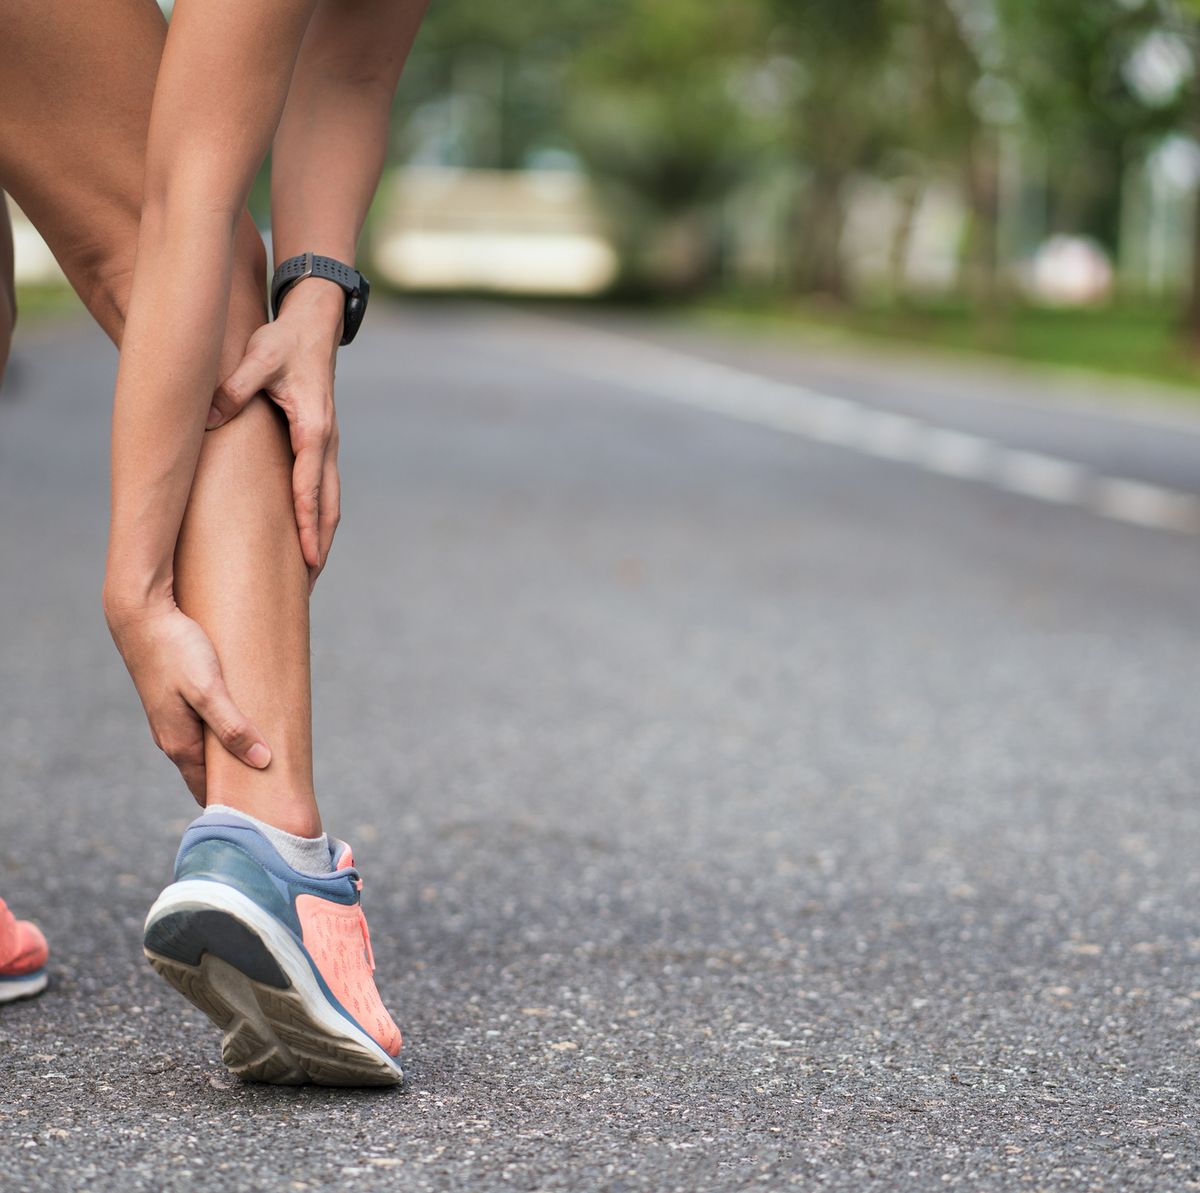 7 Common Conditions that Cause Lower Leg Pain